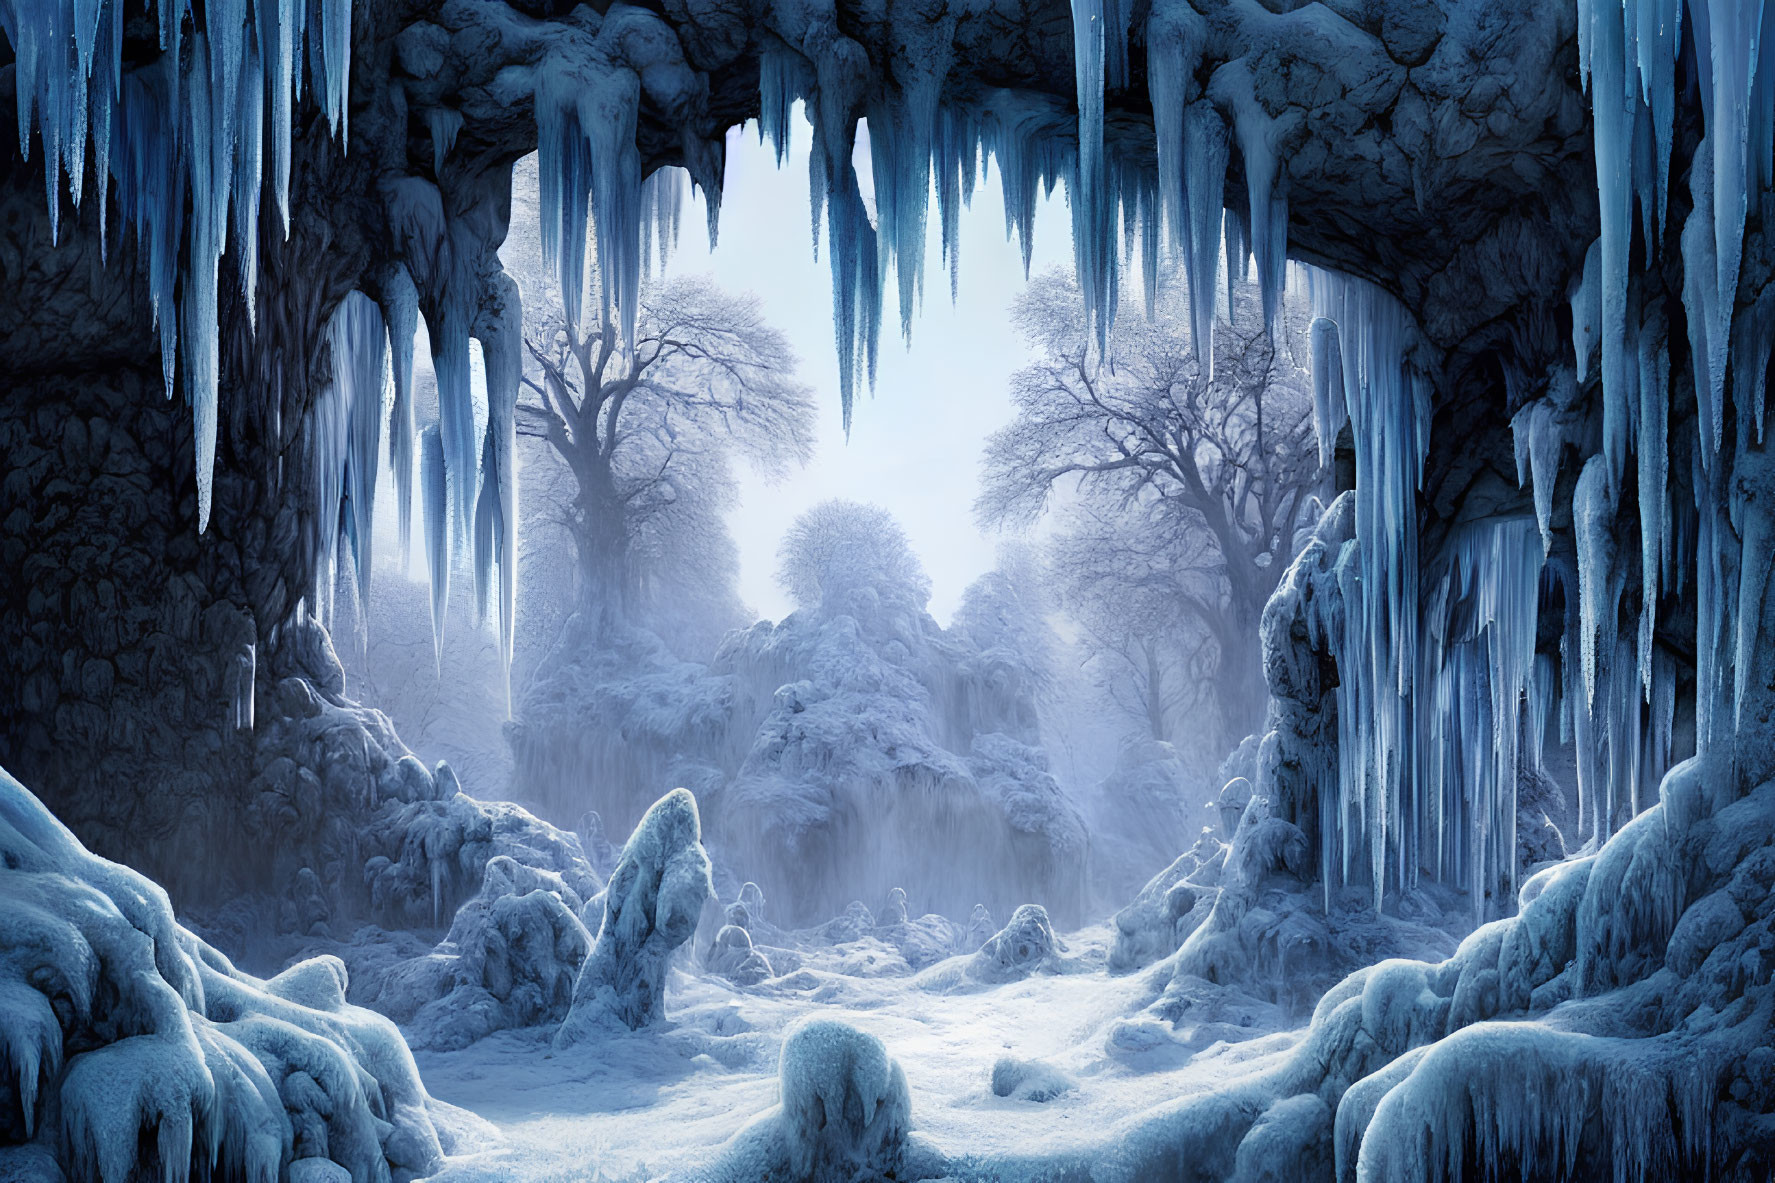 Snow-covered winter landscape with icicles and misty ambiance